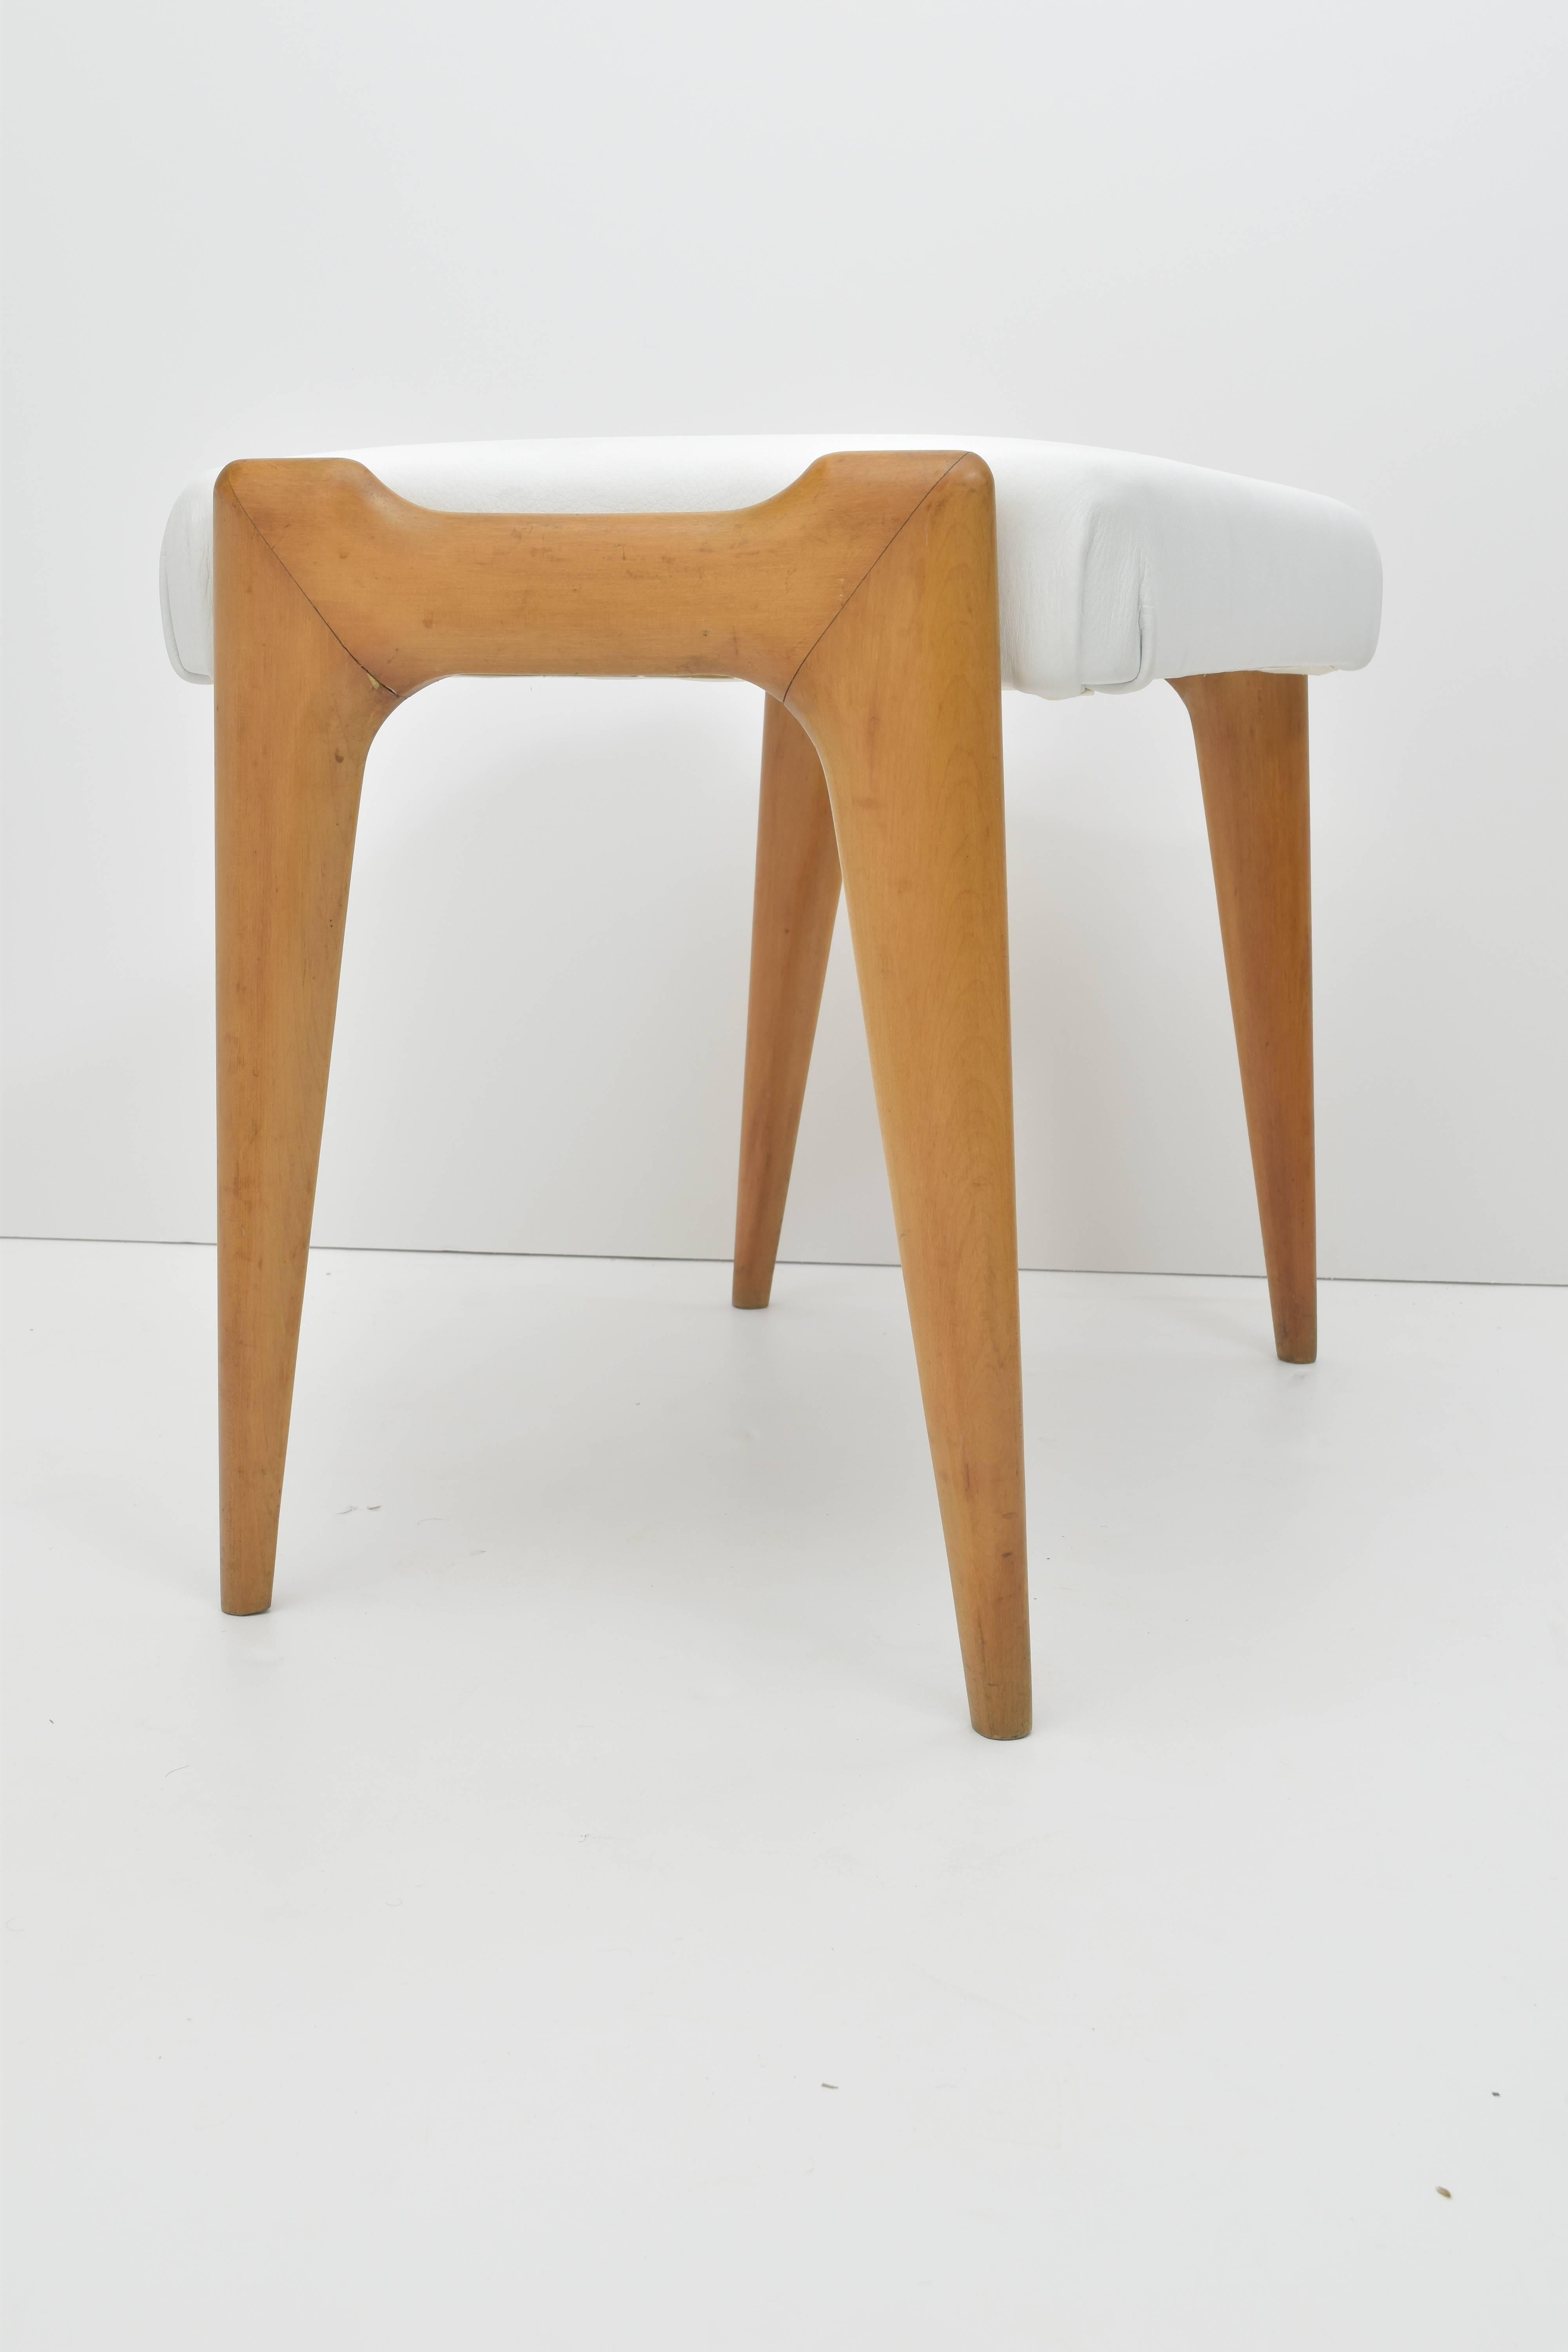 A companion pair of Gio Ponti stools.  
Largest stool measures 22 W x 14 D  x 17 H